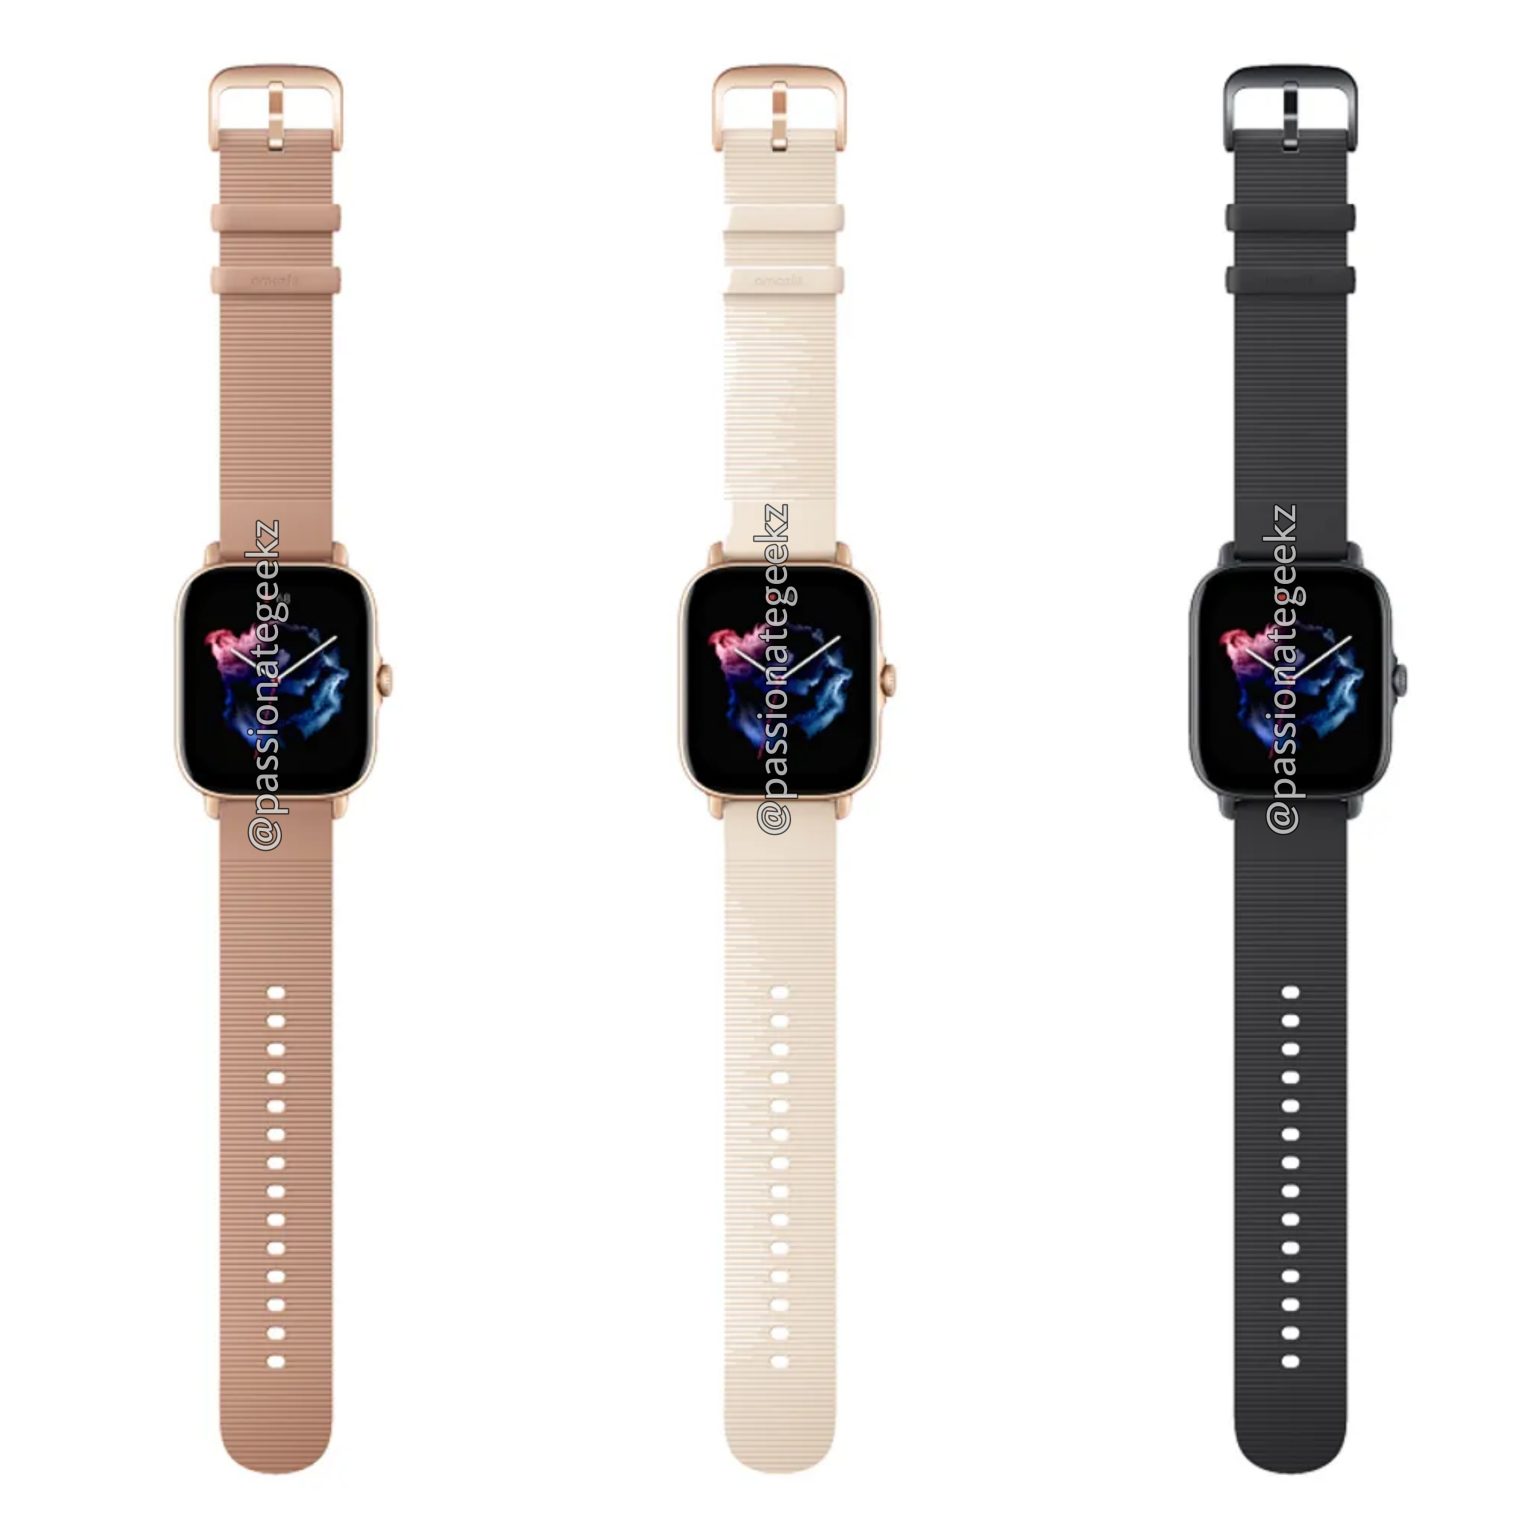 Amazfit GTR 3, GTR 3 Pro, GTS 3 With AMOLED Display, SpO2 Sensor,  Announced: Price, Specifications